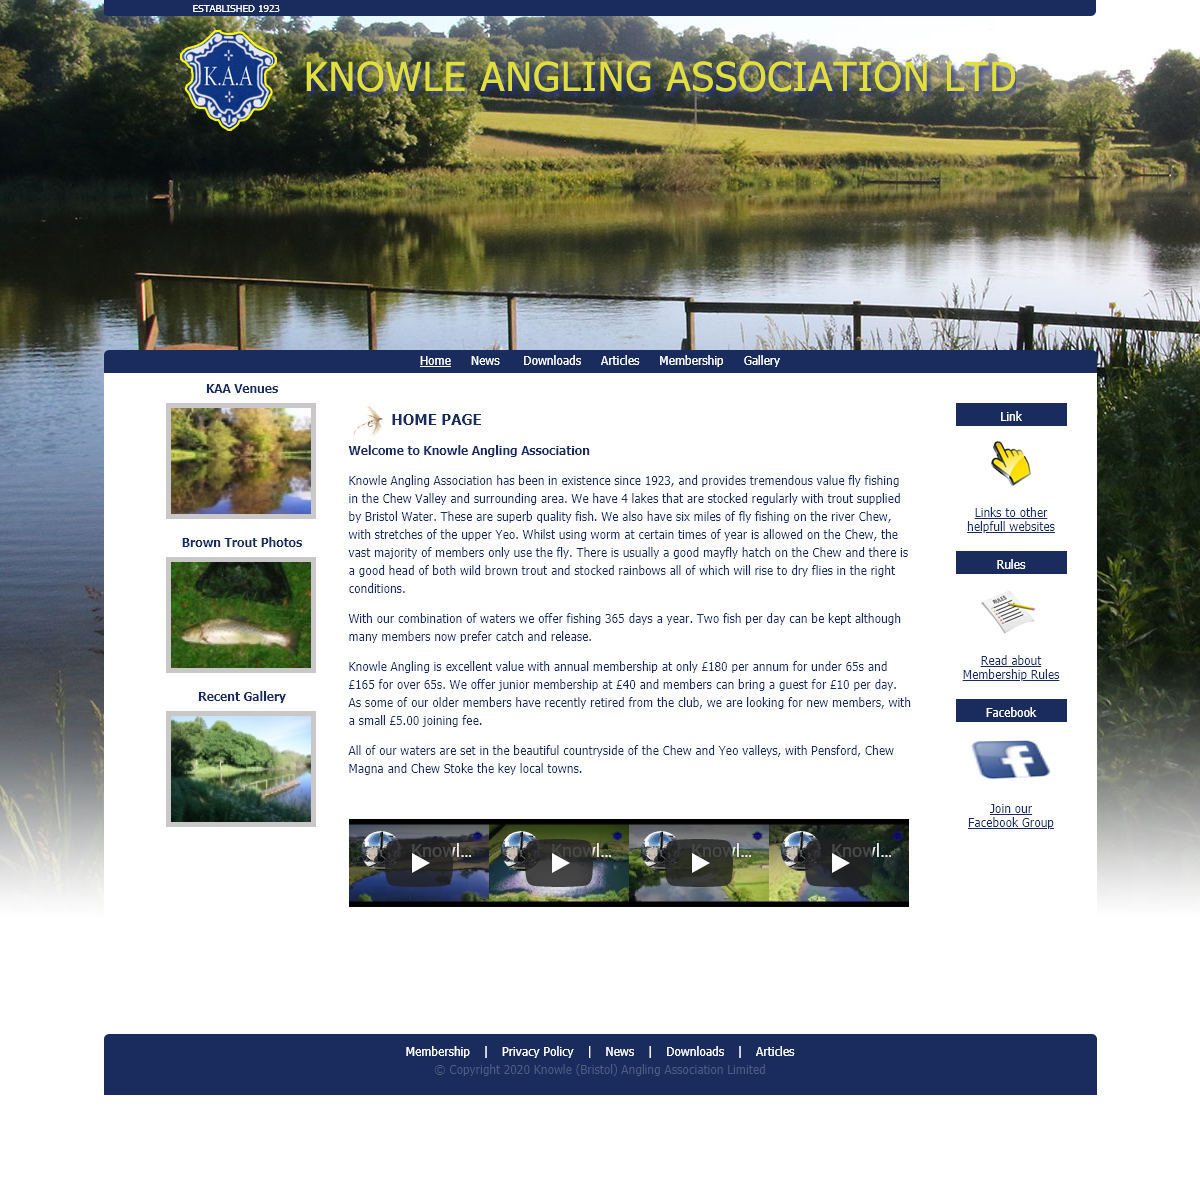 A complete backup of knowleangling.co.uk